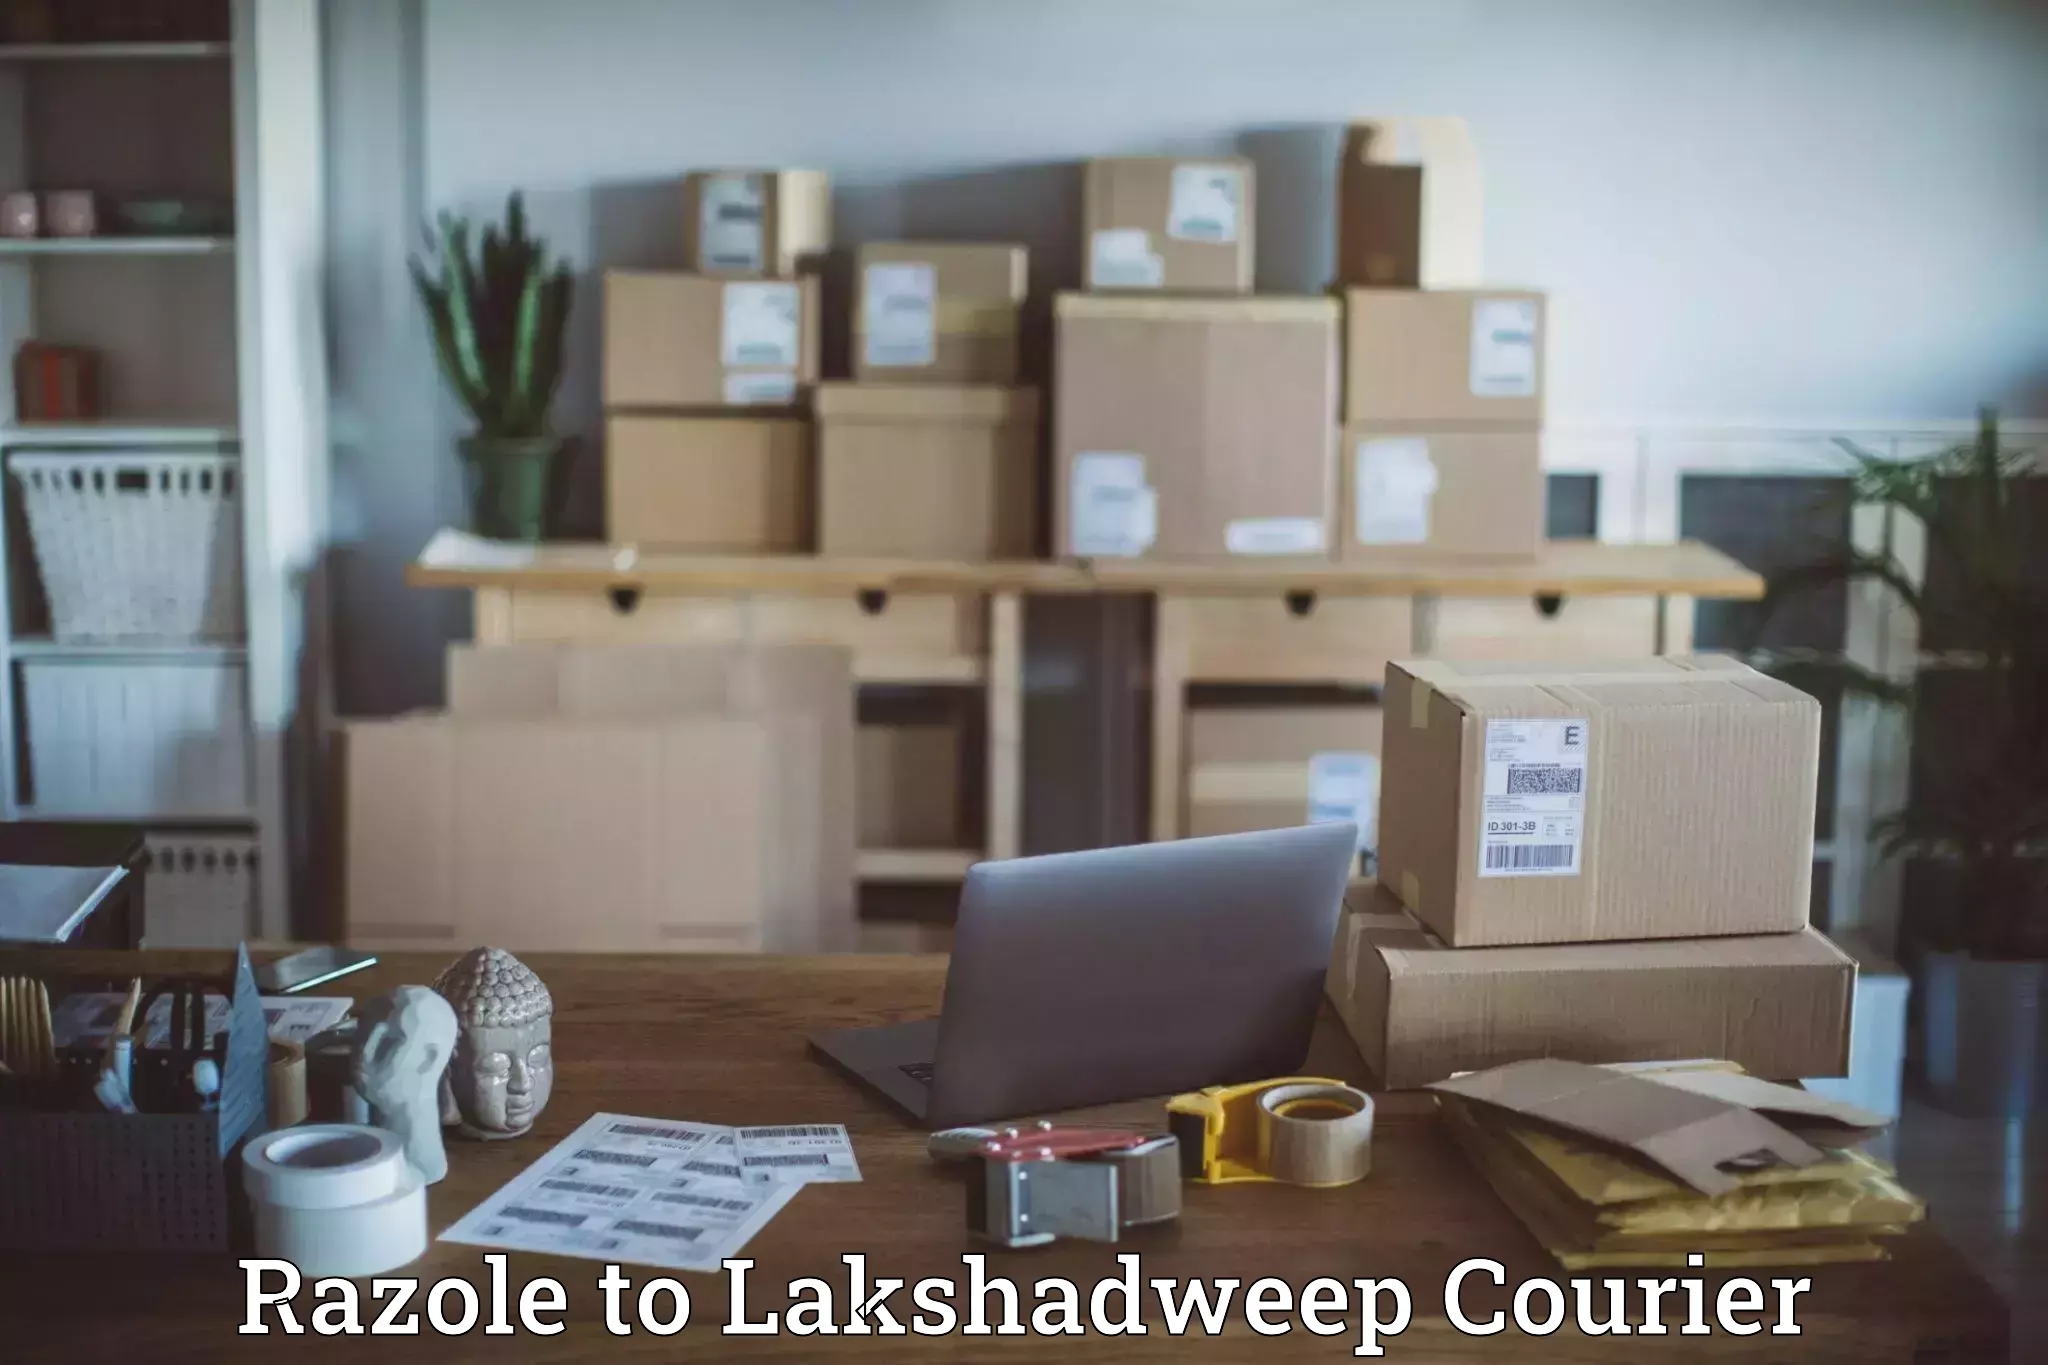 Full-service courier options Razole to Lakshadweep